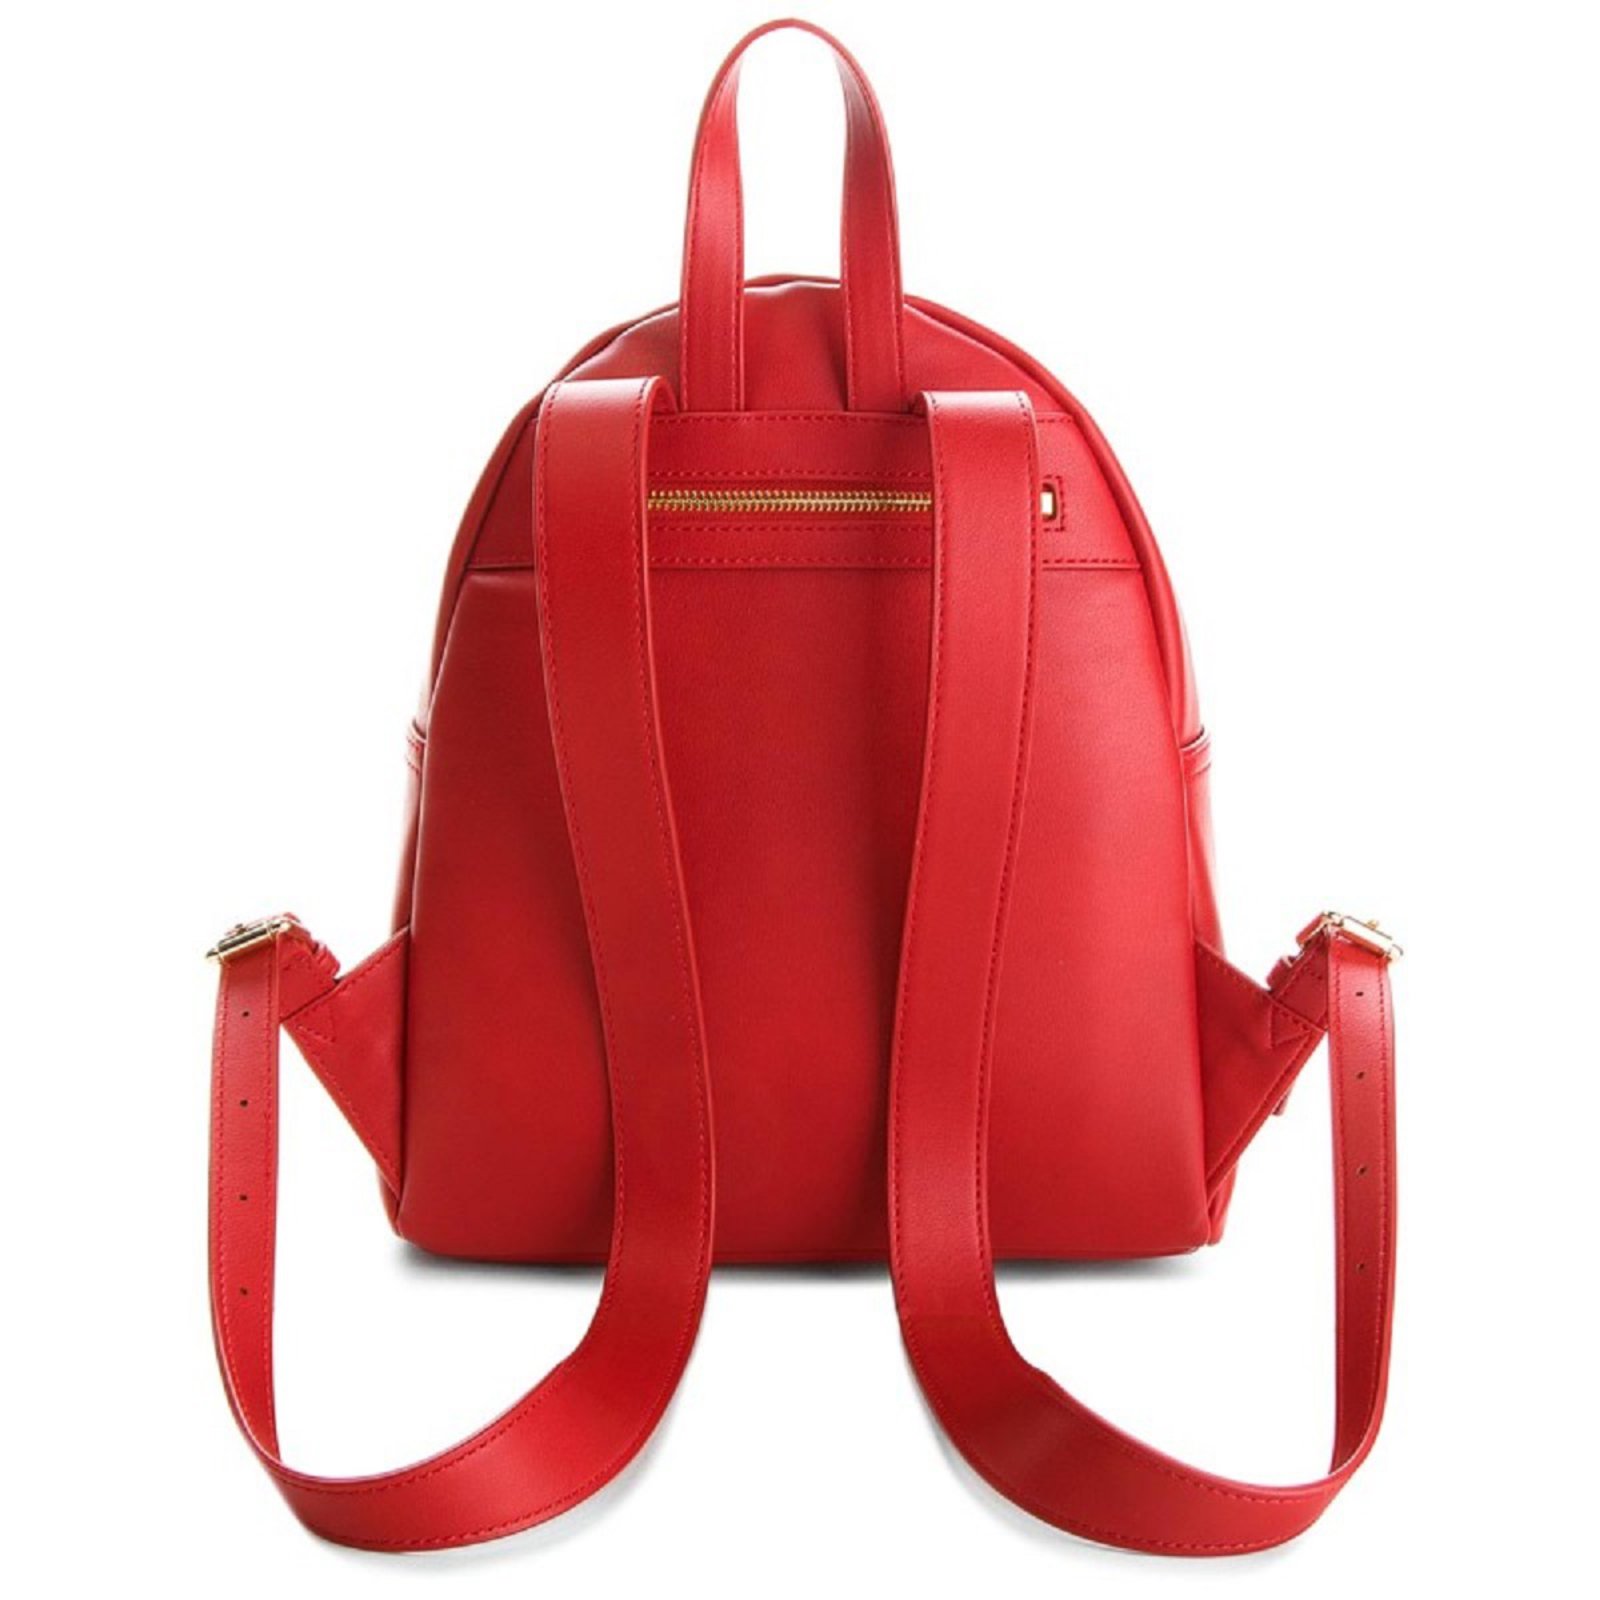 love moschino red backpack